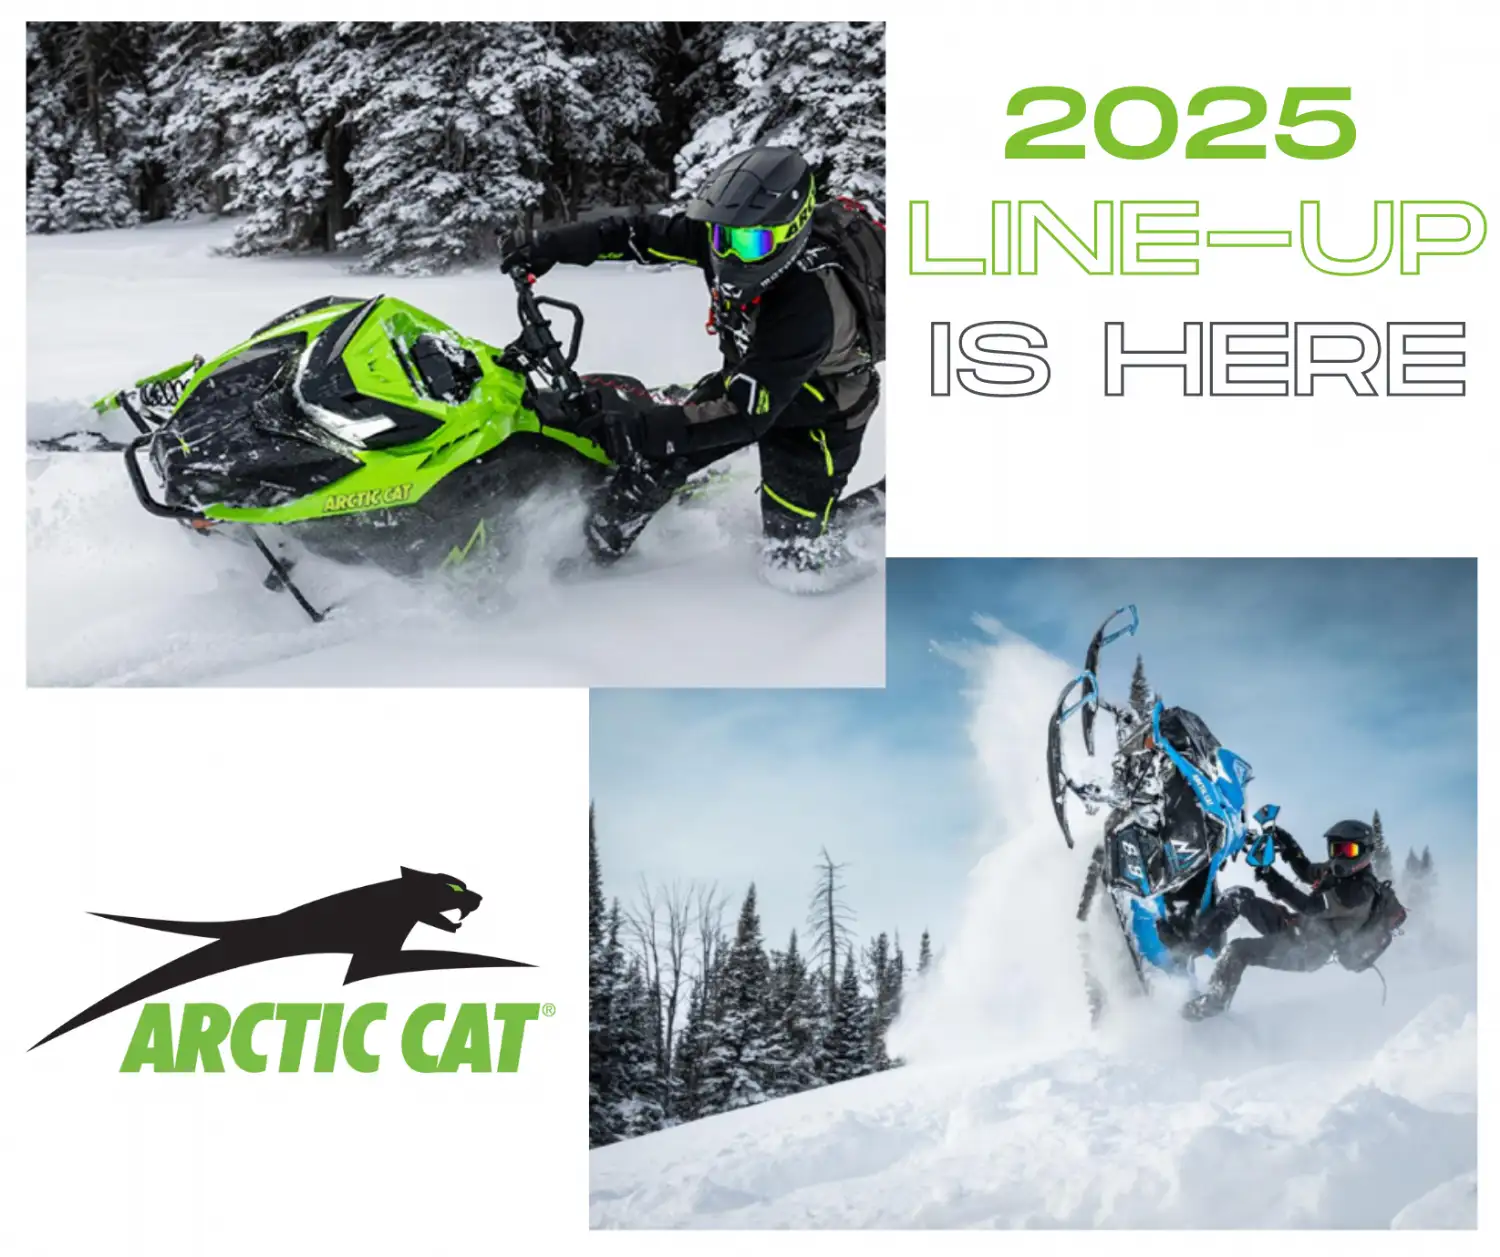 BEAT THE RUSH - ORDER YOUR 2025 SLED